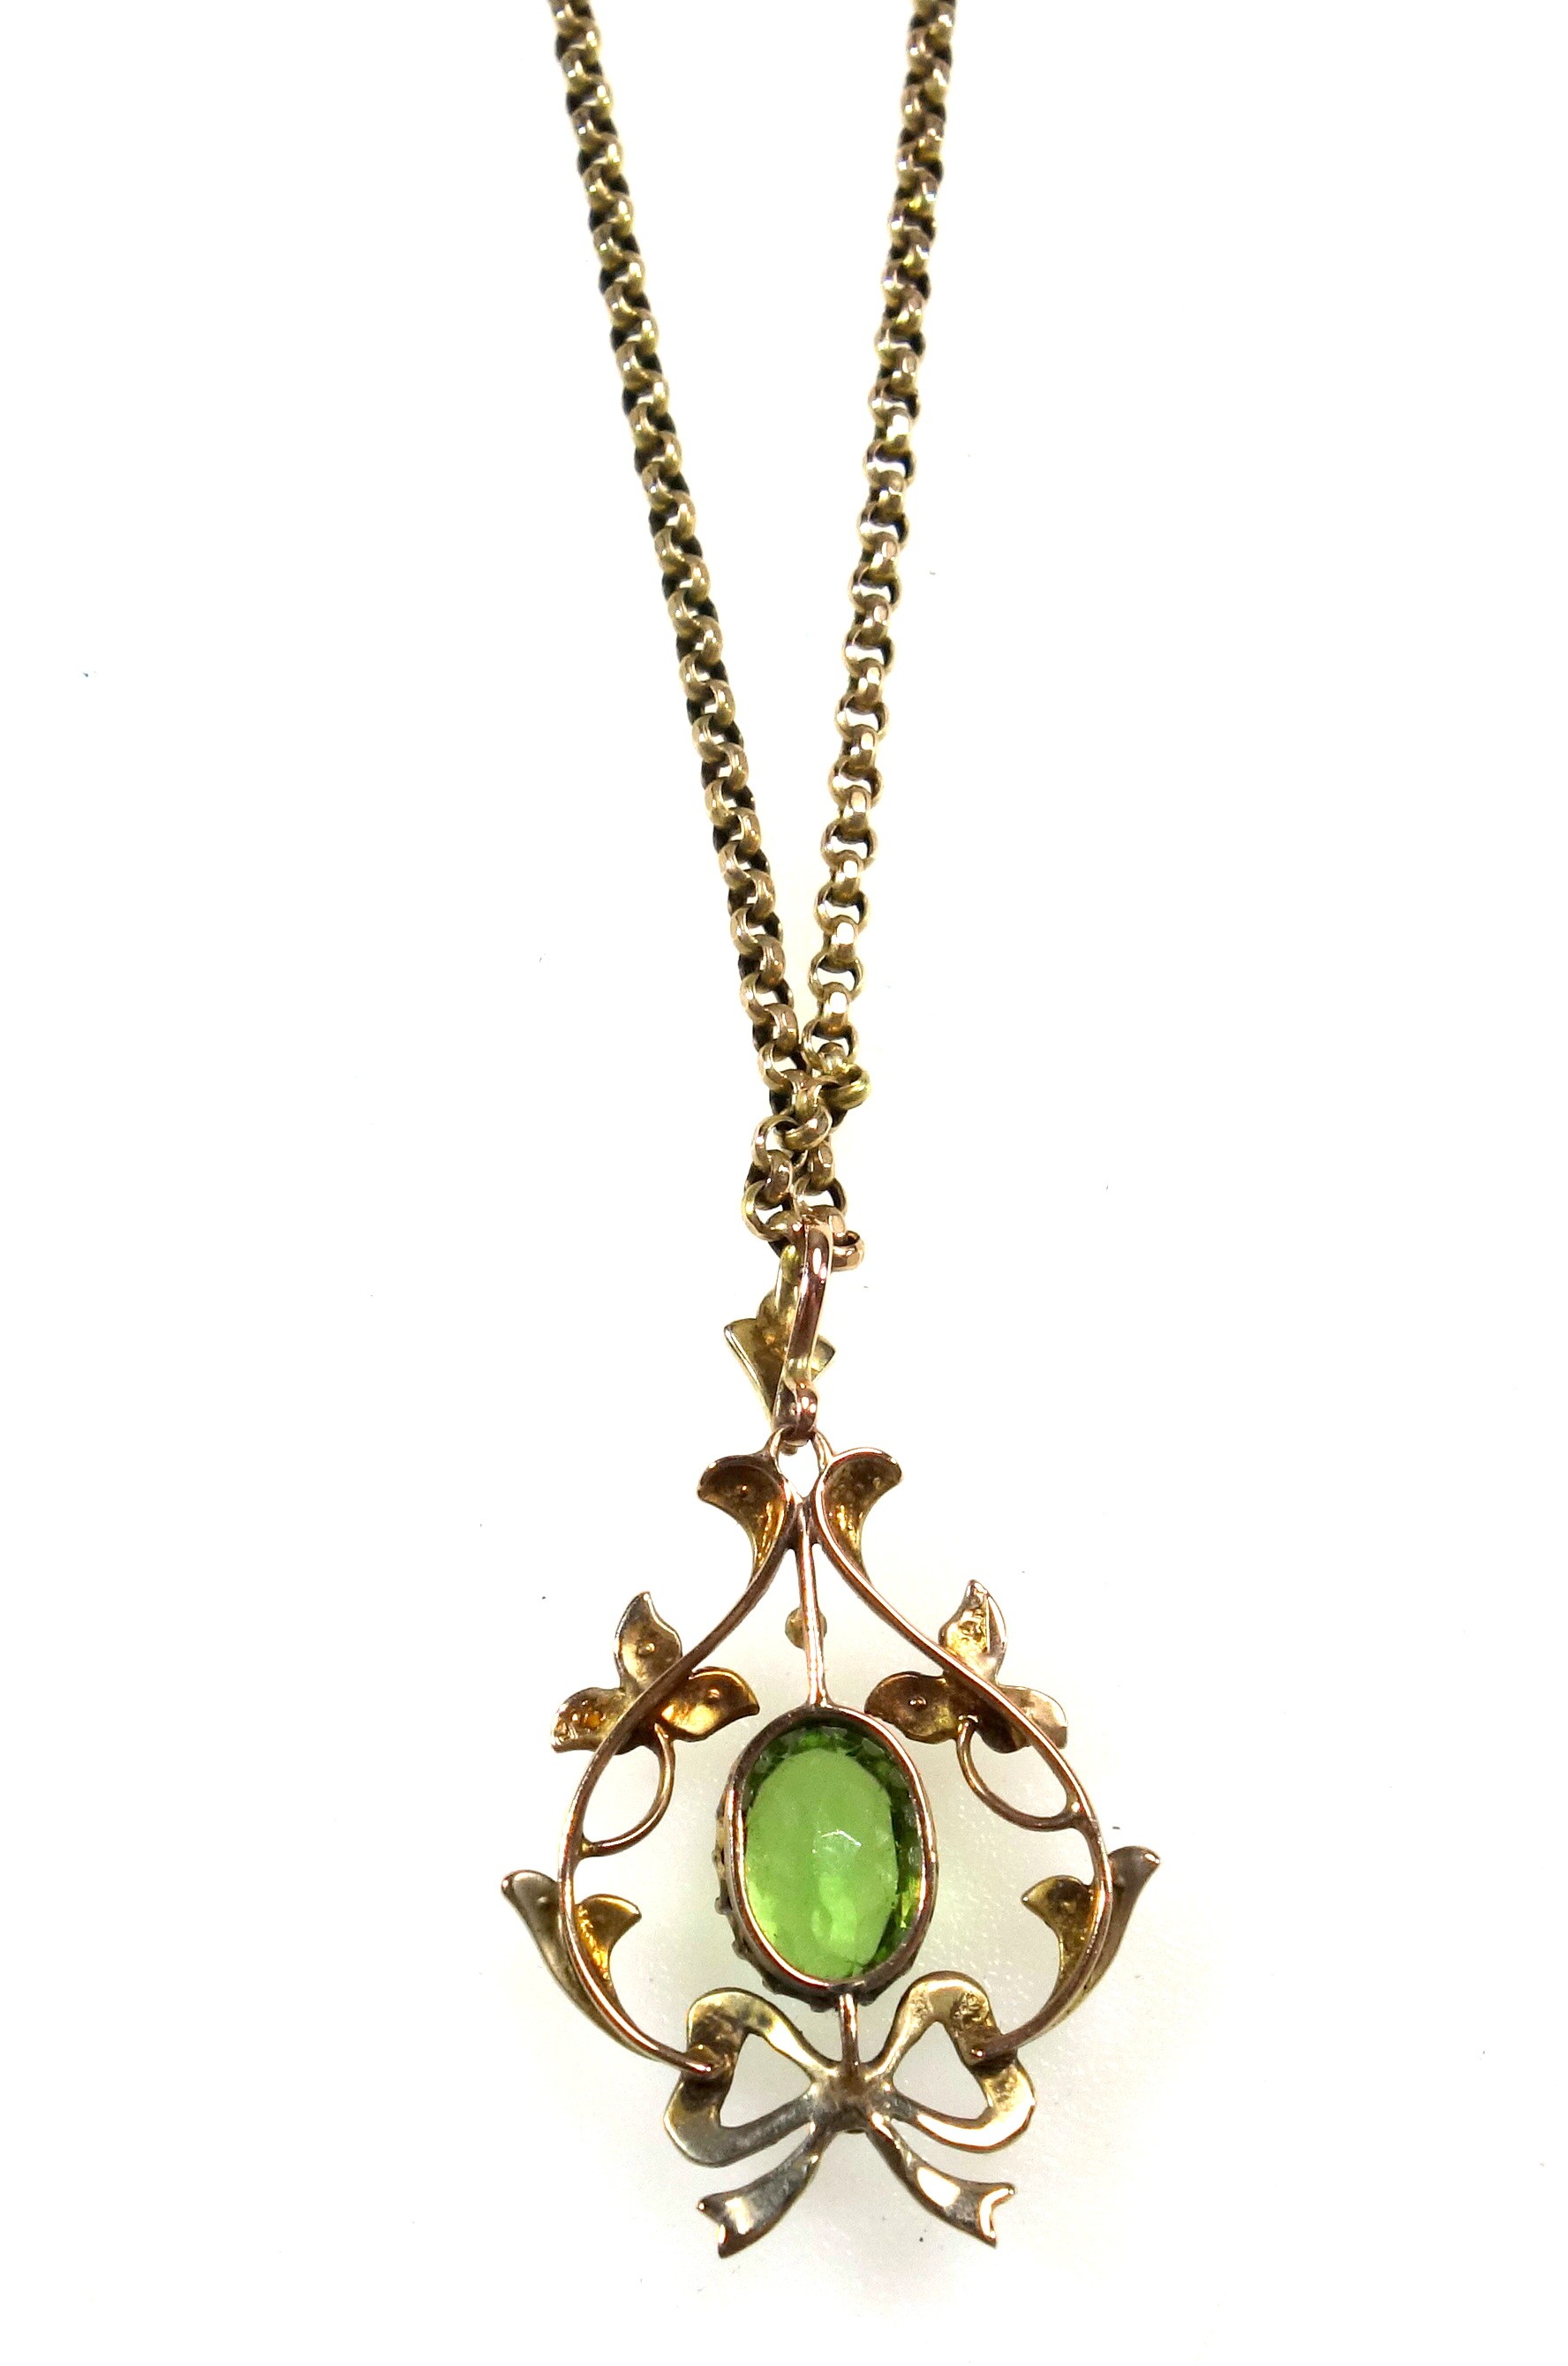 Edwardian 9ct gold belcher necklace with barrel clasp, L.39.5cm, with an openwork floral and - Image 2 of 3